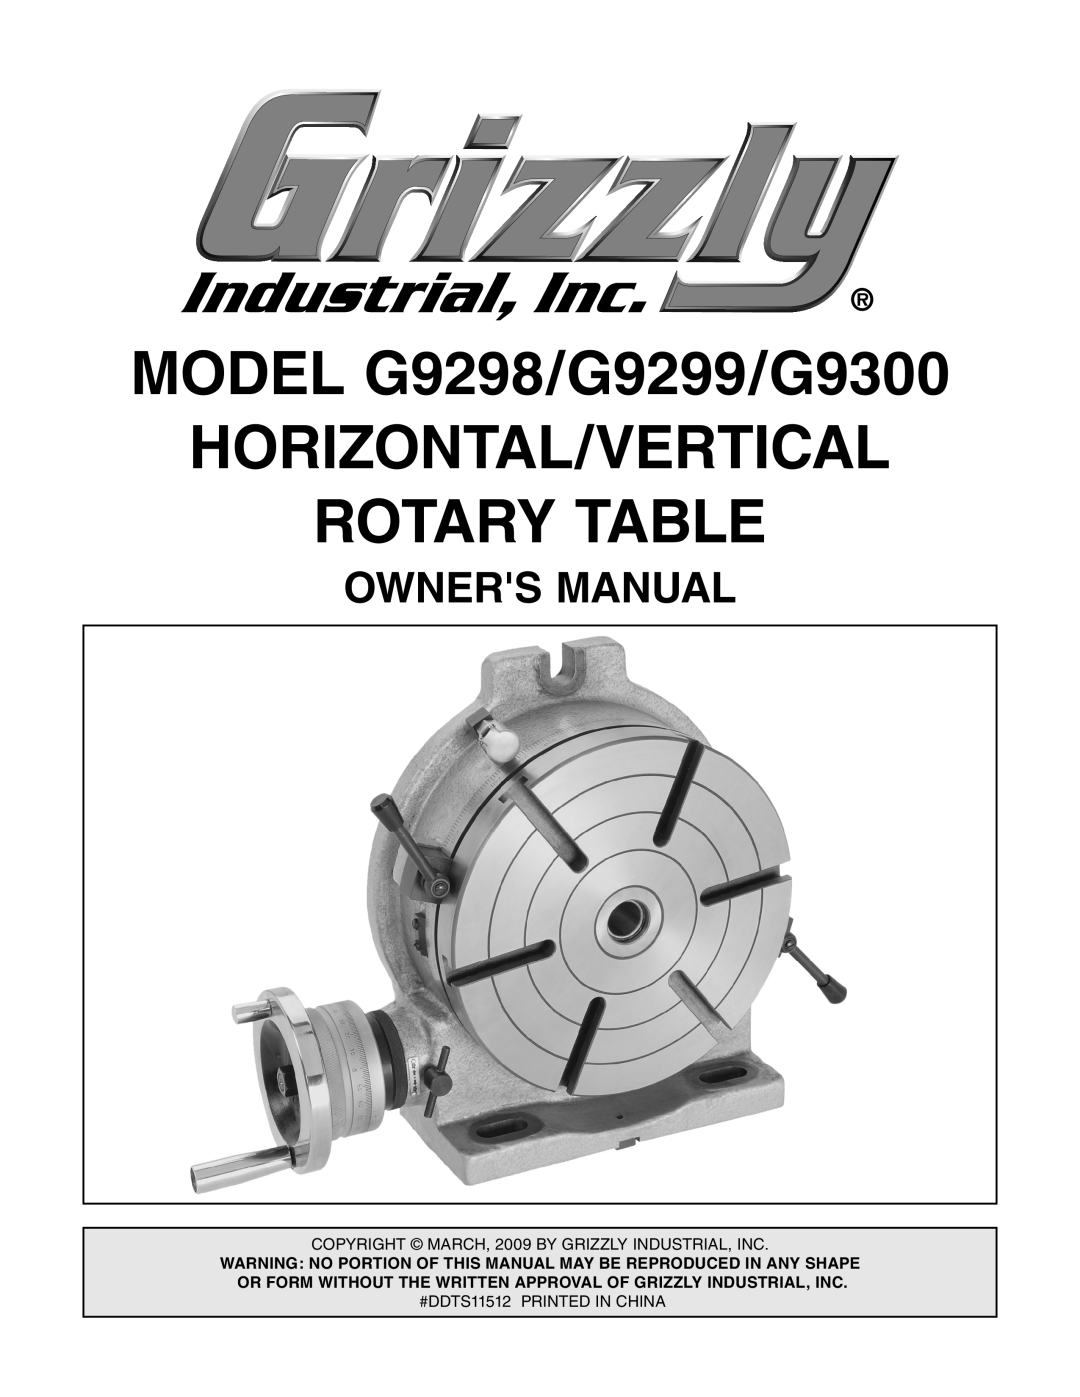 Grizzly owner manual OWNERS Manual, MODEL G9298/G9299/G9300 HORIZONTAL/VERTICAL ROTARY TABLE 